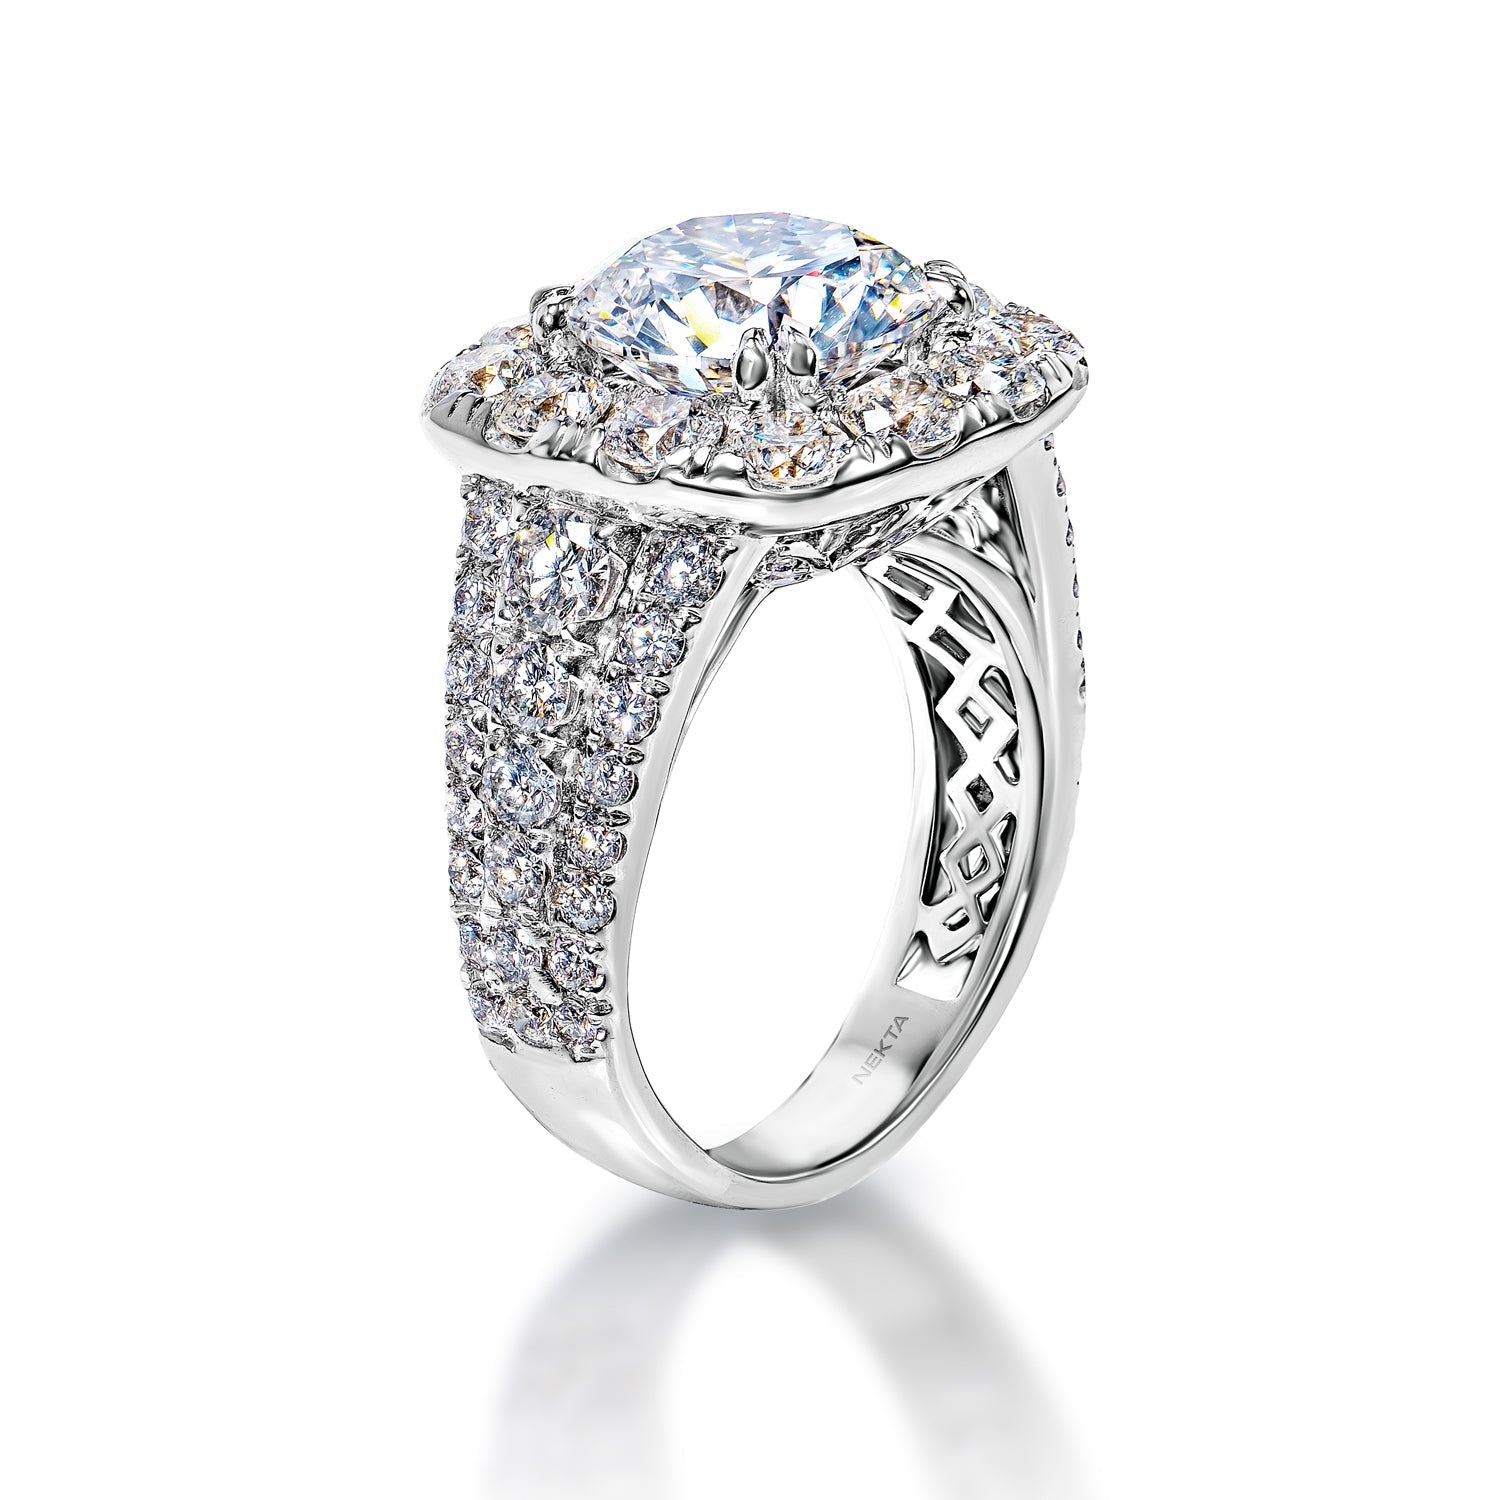 Ashley 7 Carat E SI2 Round Brilliant Diamond Engagement Ring in18k White Gold. Side VIew